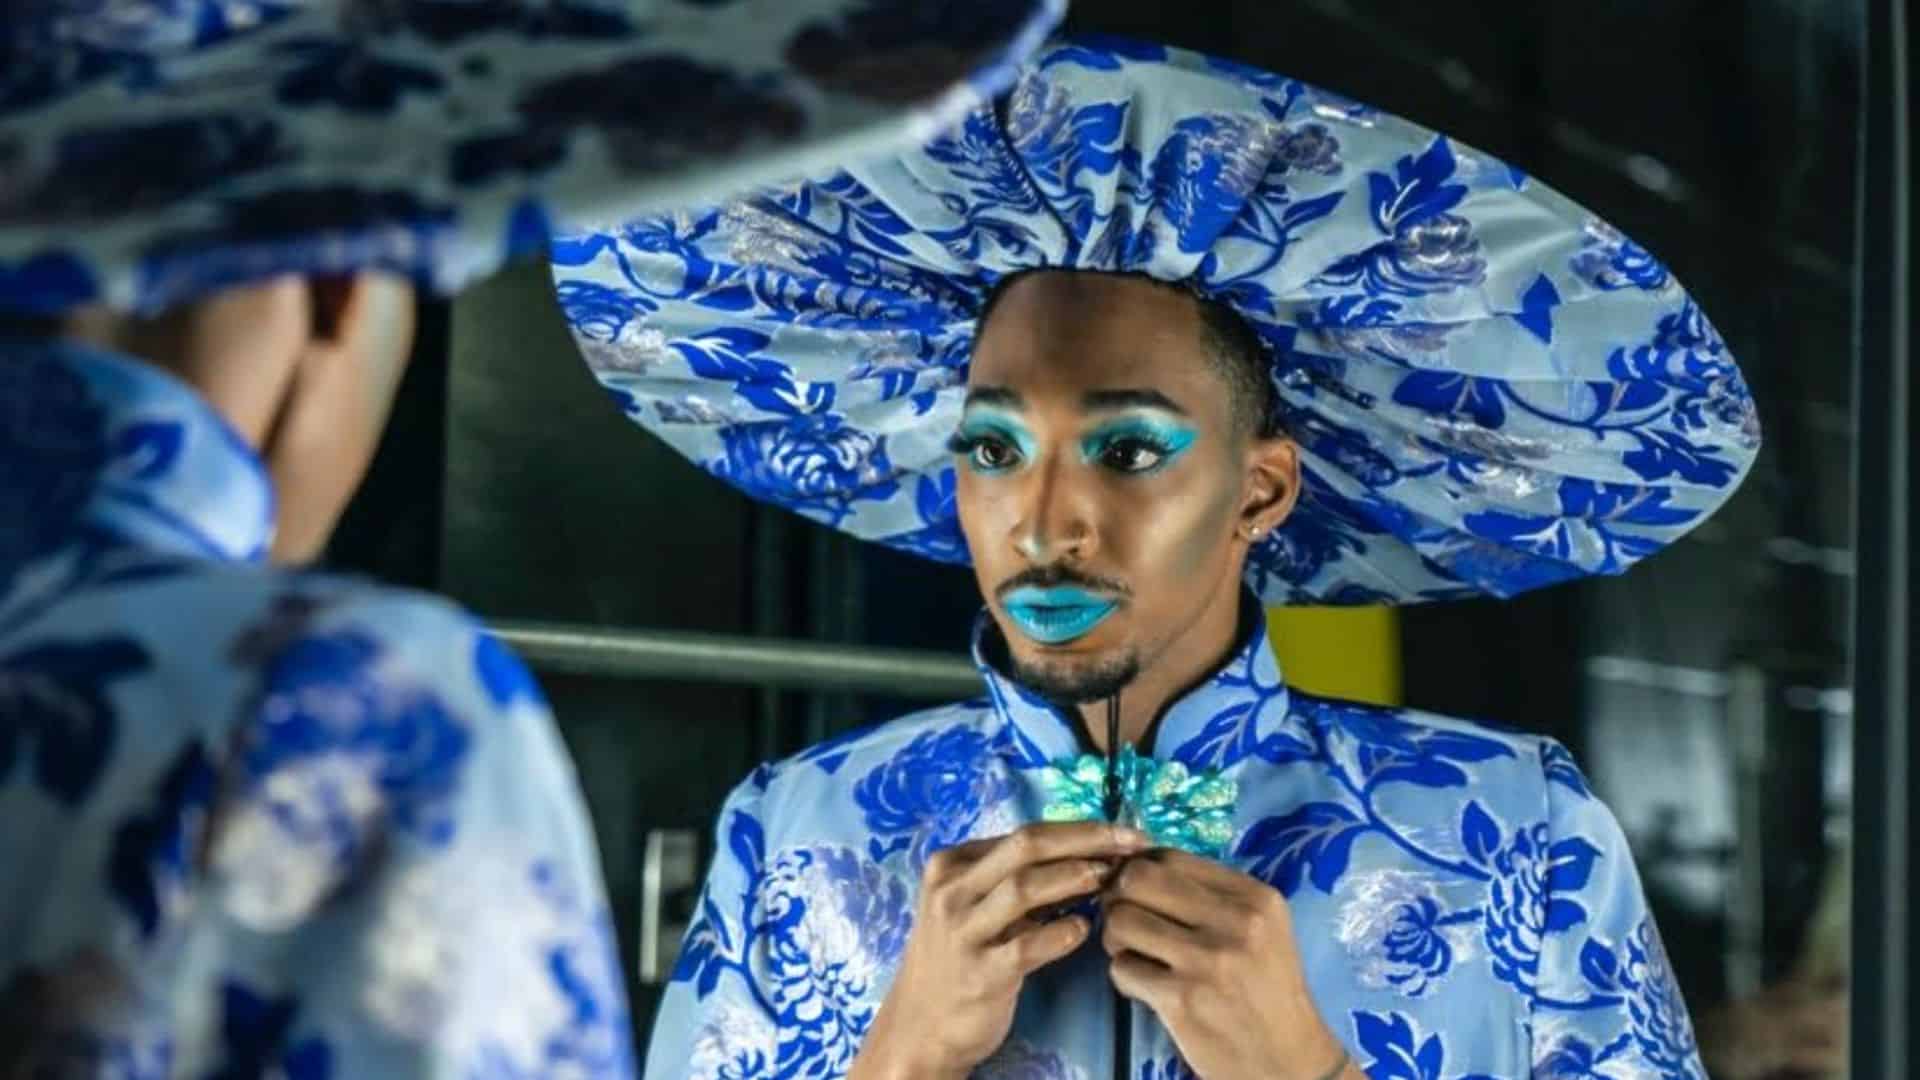  A close-up of Isaiah Wilder in a blue and white costume in this image from Scout Productions.